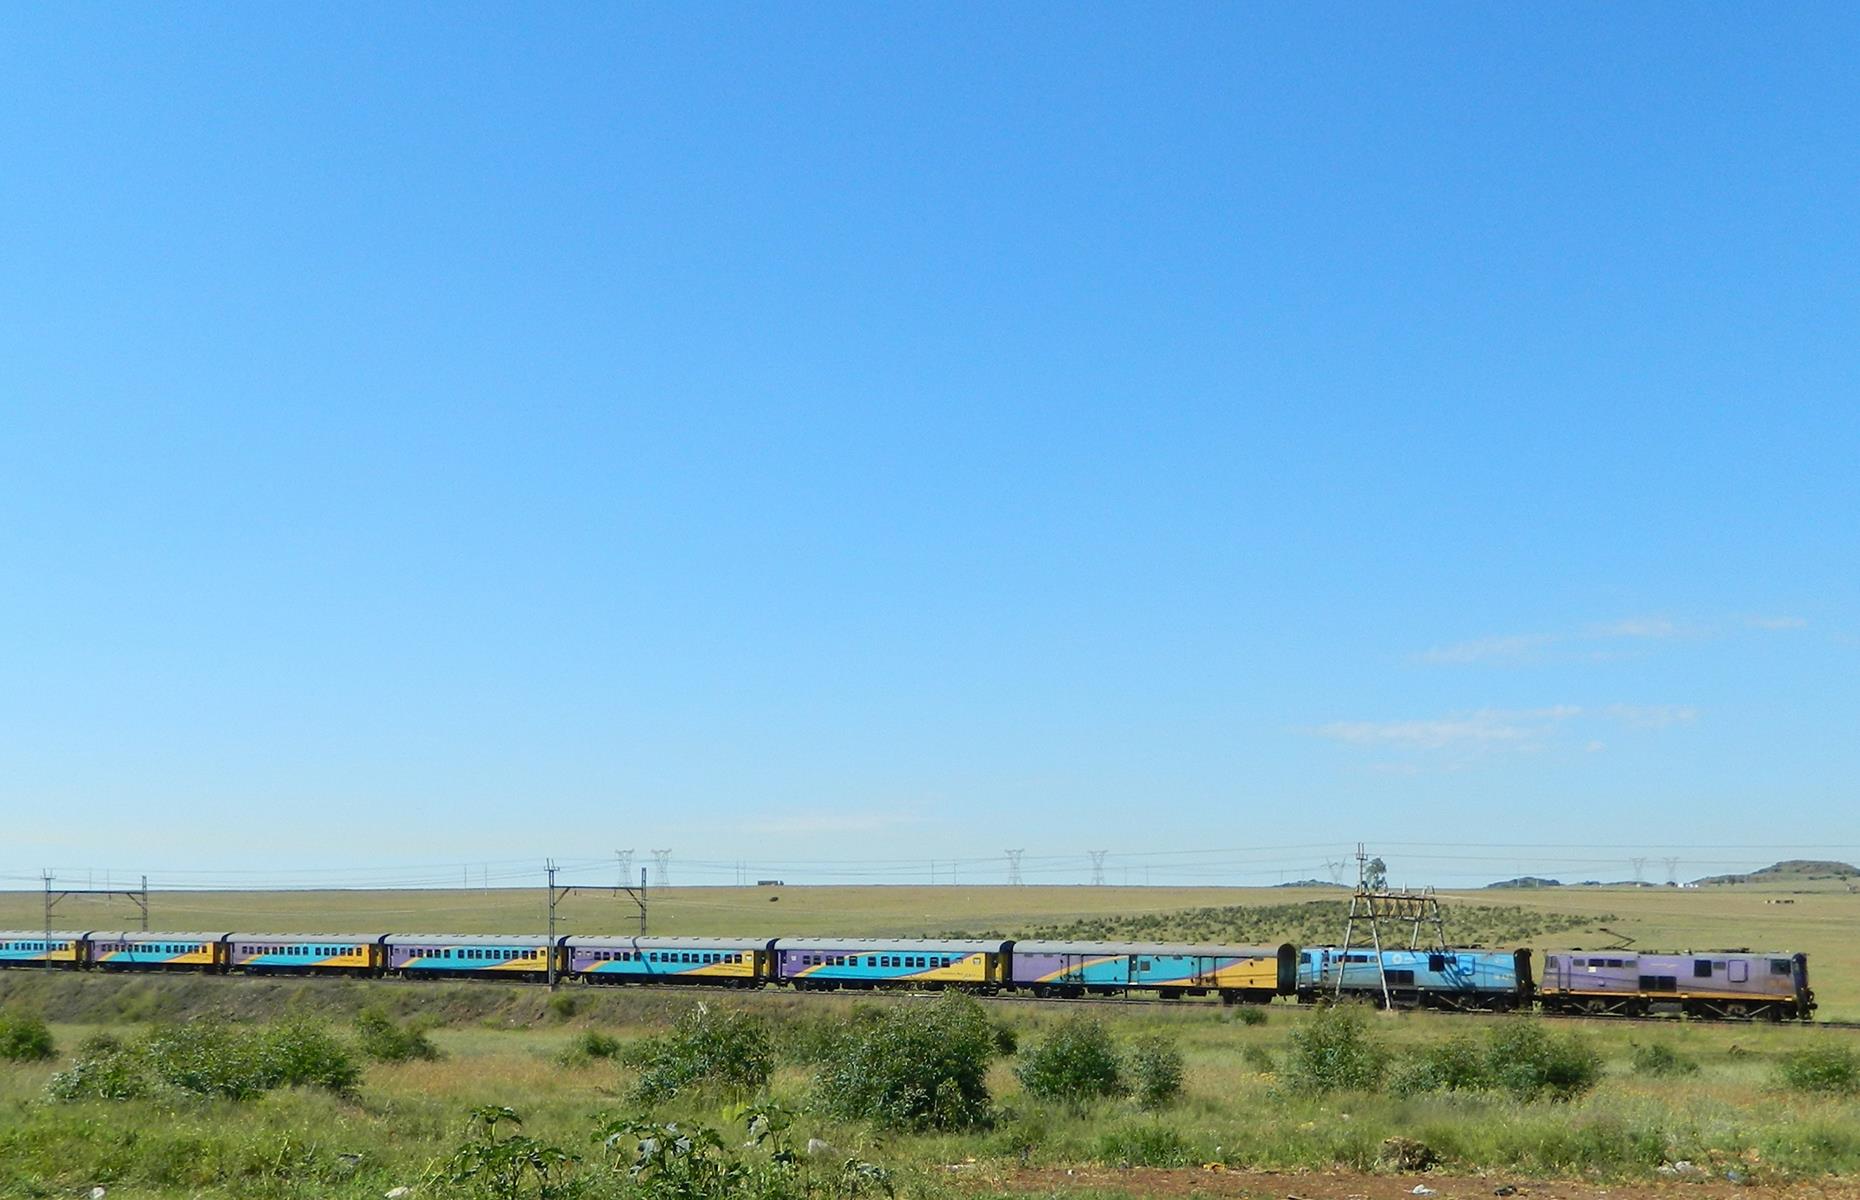 <p>The <a href="http://www.shosholozameyl.co.za/">Shosholoza Meyl</a> train, with sleeping cars and a restaurant, is the cheaper option with one-way fares starting from $44. The other option is on the train's <a href="https://www.southafricanrailways.co.za/premier_classe.html">Premier Classe</a> which has private sleepers, all meals included and a lounge-bar car. With prices starting from $251 for a one-way ticket, it's a lot more affordable than the Blue Train and offers a very similar experience.</p>  <p><strong>Read more: <a href="https://www.loveexploring.com/galleries/64341/the-worlds-most-luxurious-train-journeys-you-wont-want-to-get-off">The world’s most luxurious train journeys you won’t want to get off</a></strong></p>